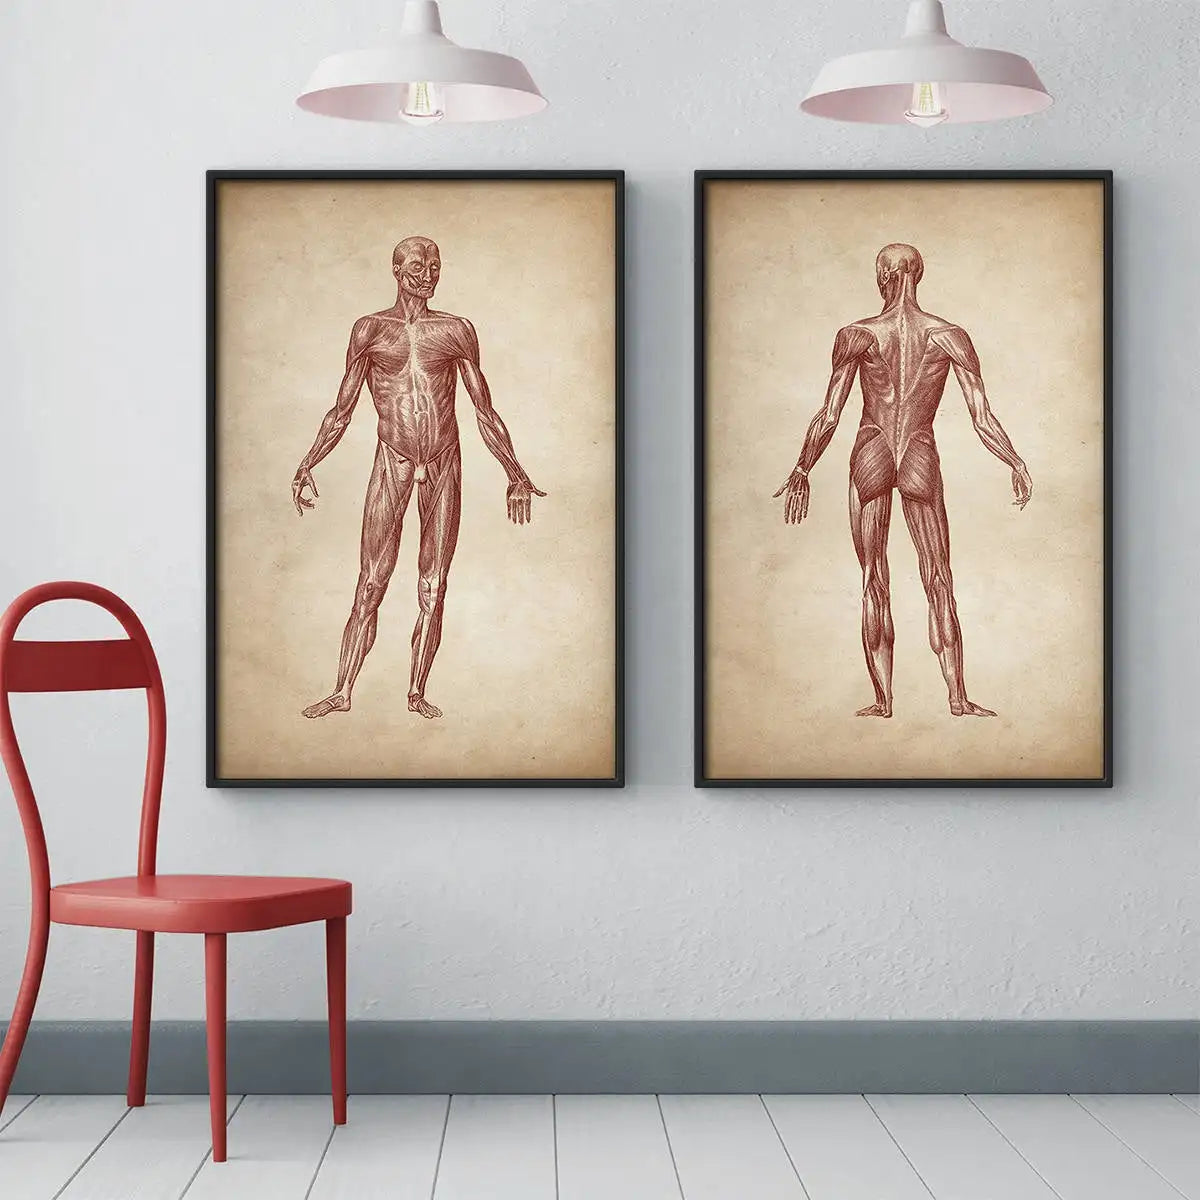 Vintage Human Muscular Anatomy Medical Clinic Wall Picture Skeleton Organ System Canvas Print Body Education Poster - NICEART